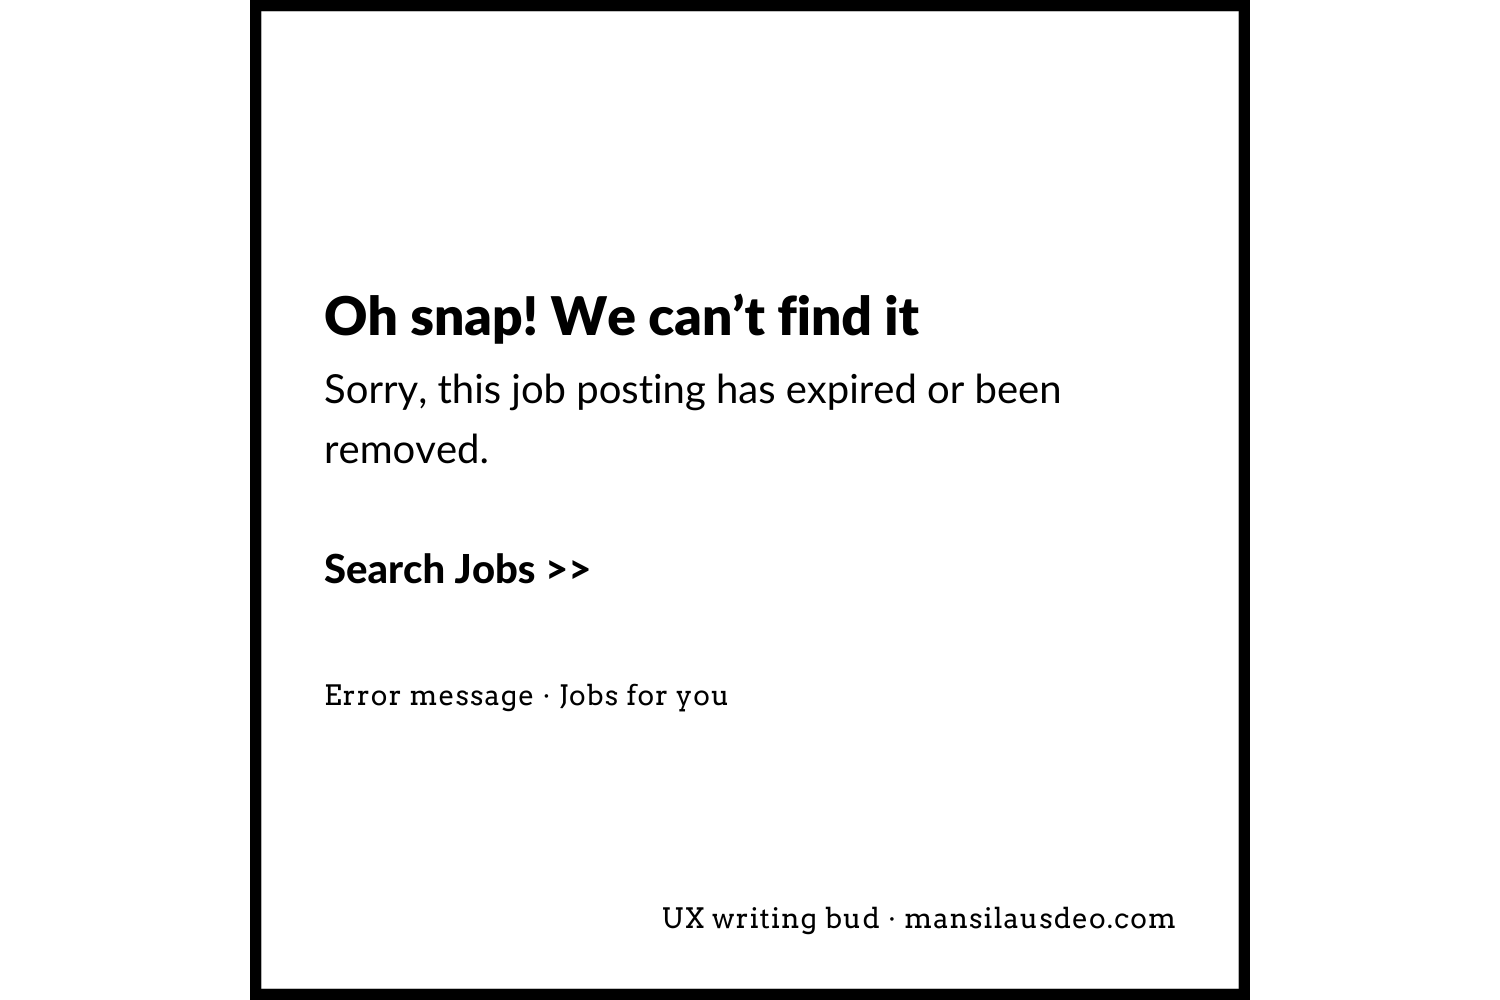 Oh snap! We can't find it Sorry, this job posting has expired or been removed. Search jobs >> Error message - Jobs for you